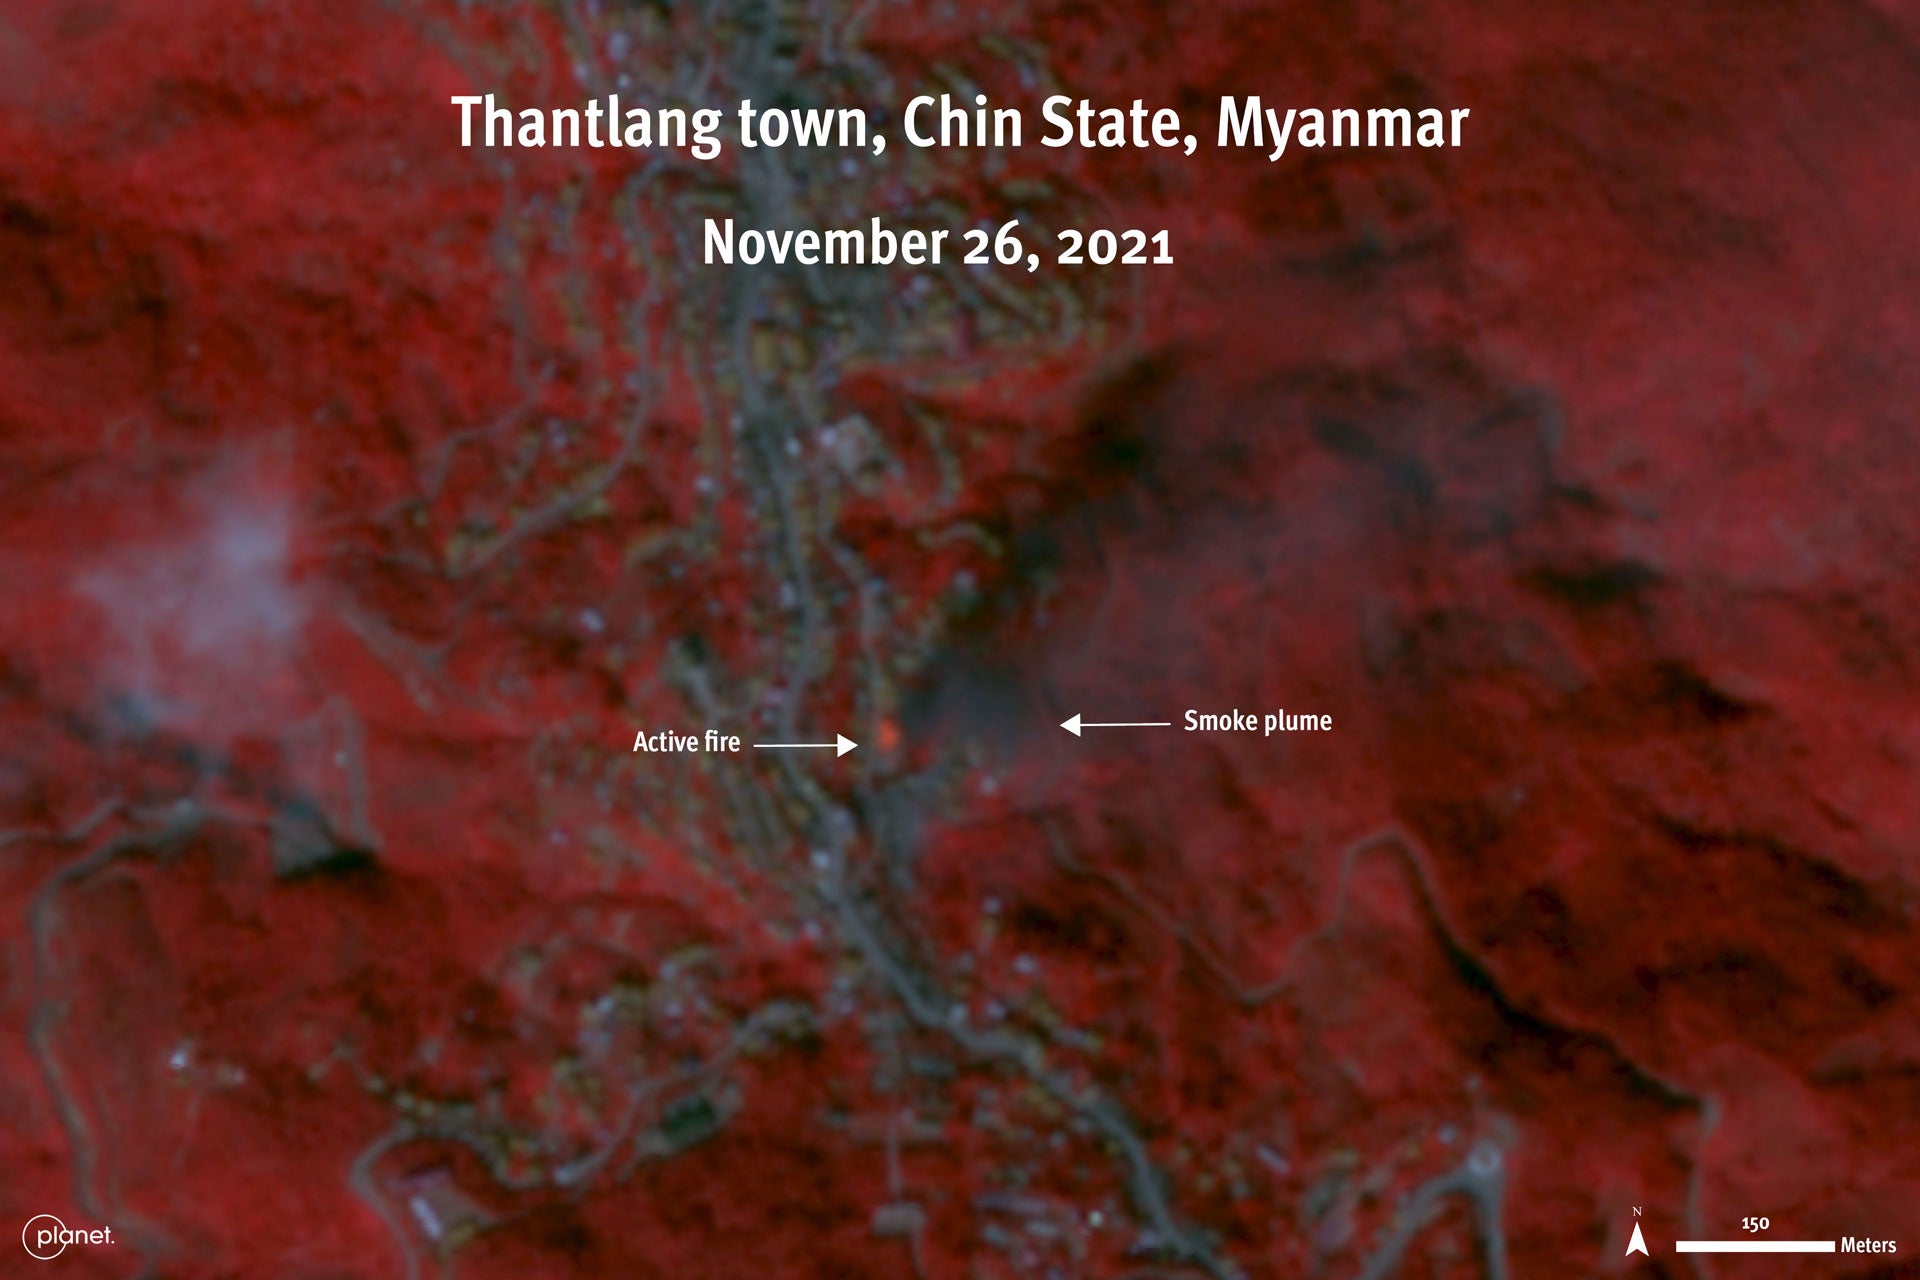 Satellite image displayed in color infrared shows an active fire